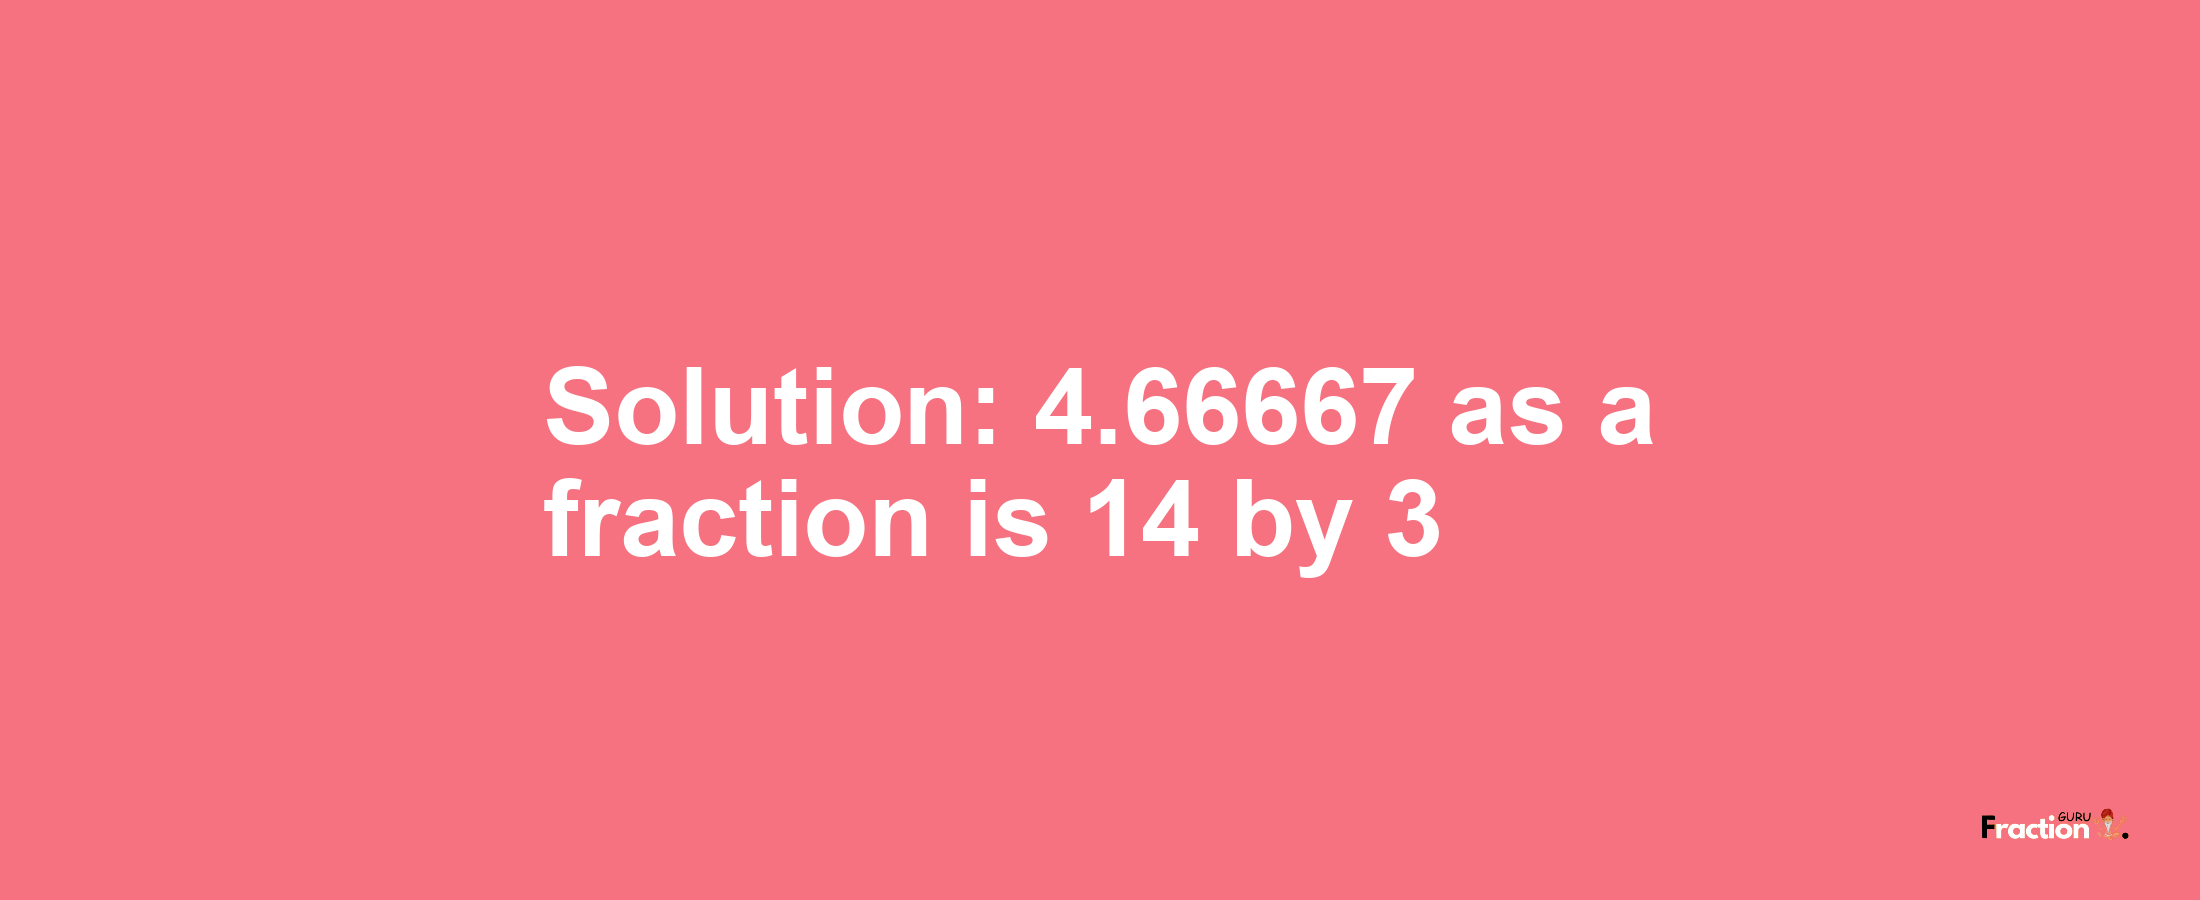 Solution:4.66667 as a fraction is 14/3